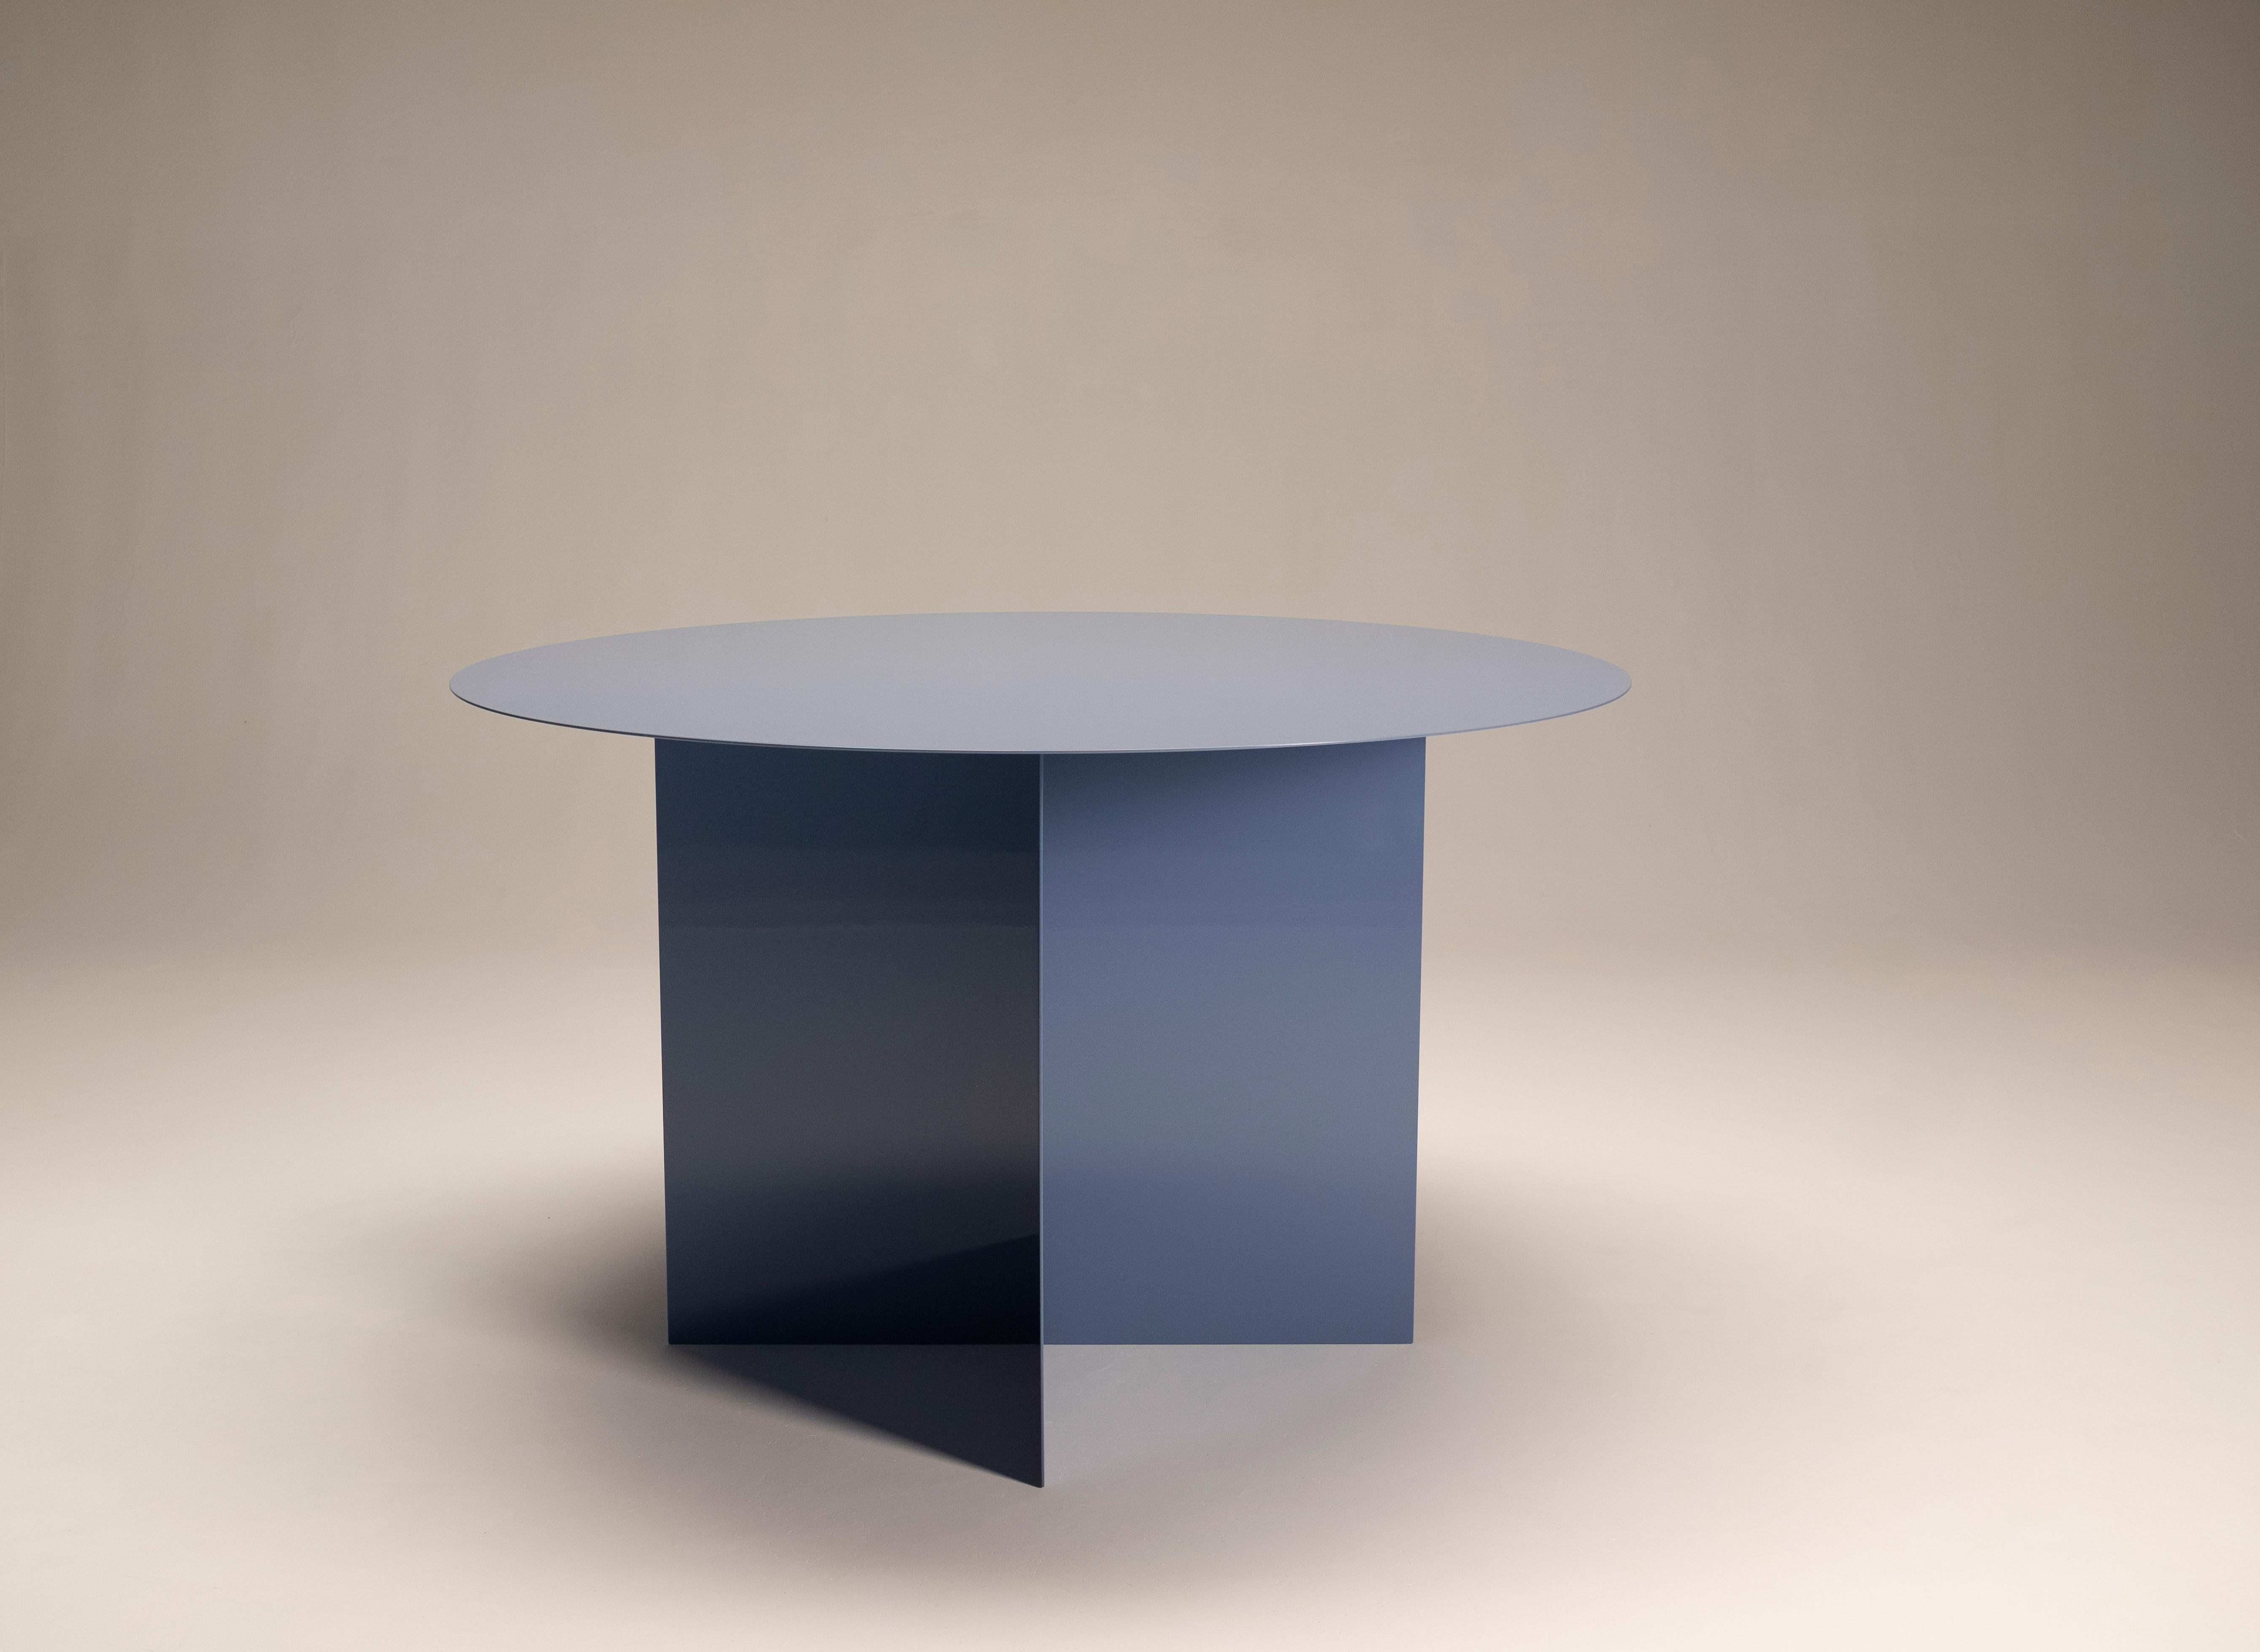 Across Round Dining Table by Secondome Edizioni
Designer: Claudia Pignatale.
Dimensions: Ø 120 x H 72 cm.
Materials: Iron.

Collection / Production: Secondome. This piece can be customized. Available finishes: any RAL color. Also available in